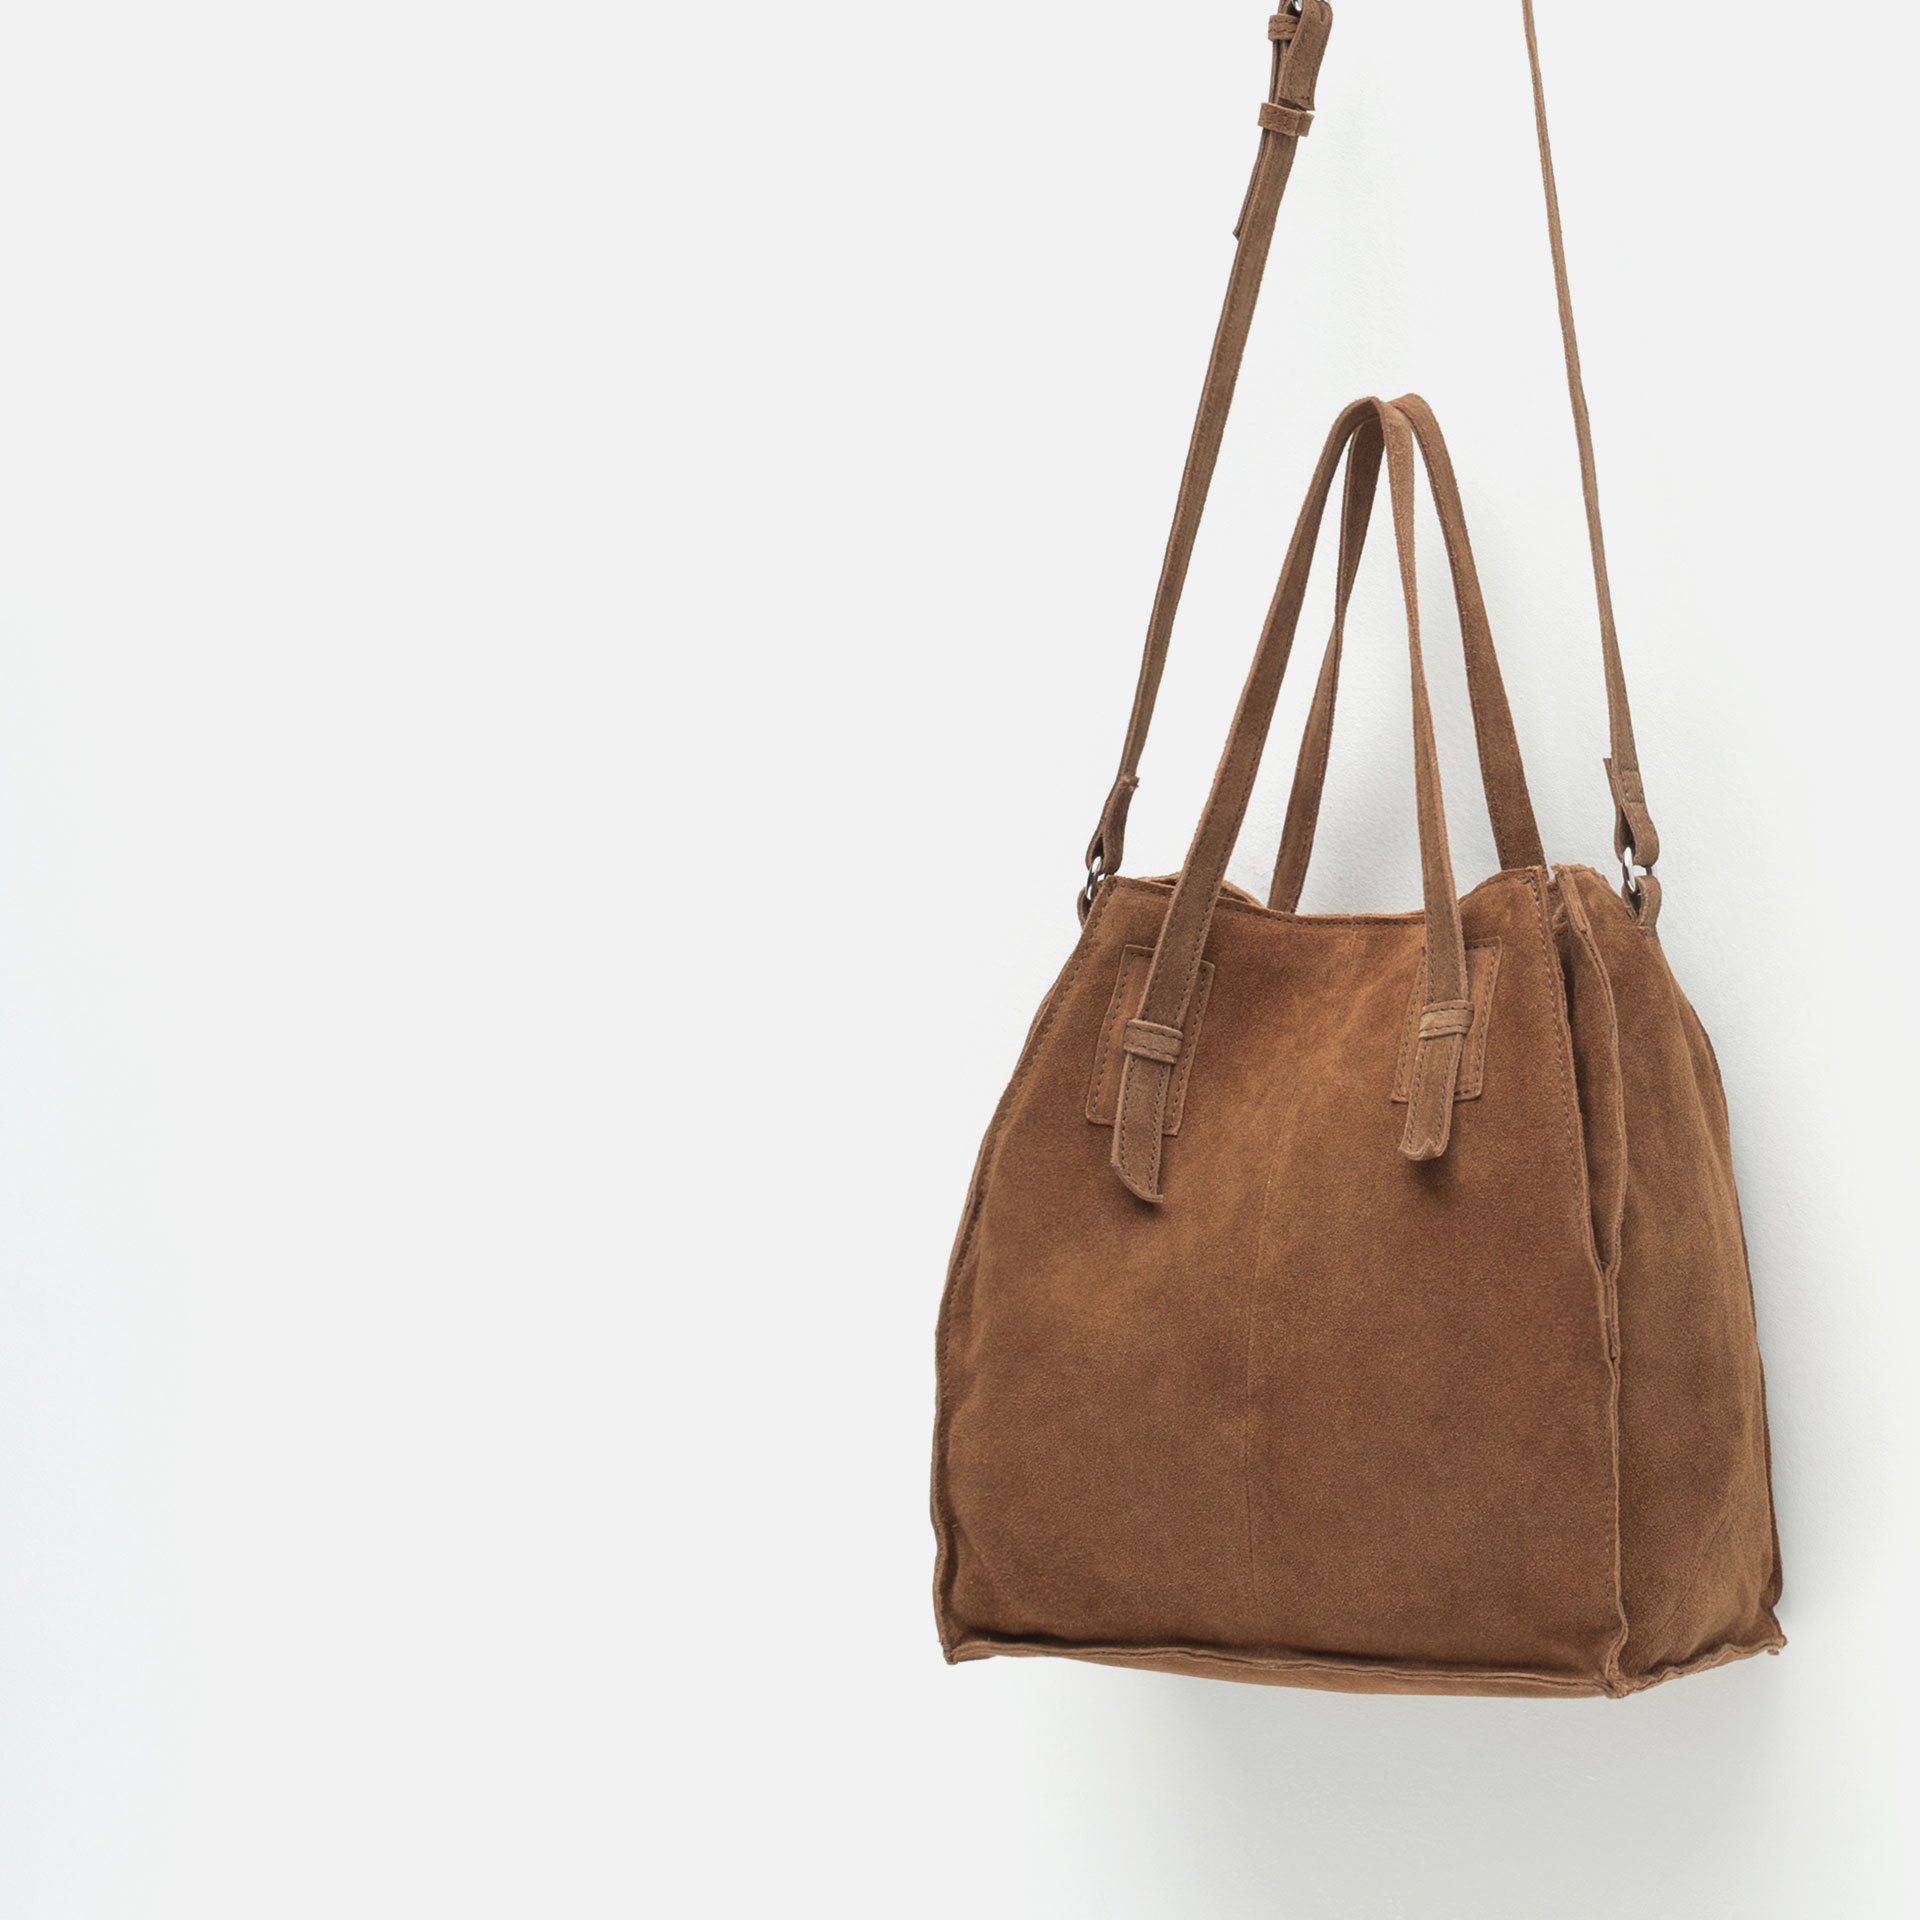 Zara Suede Tote Bag in Brown (Leather) | Lyst